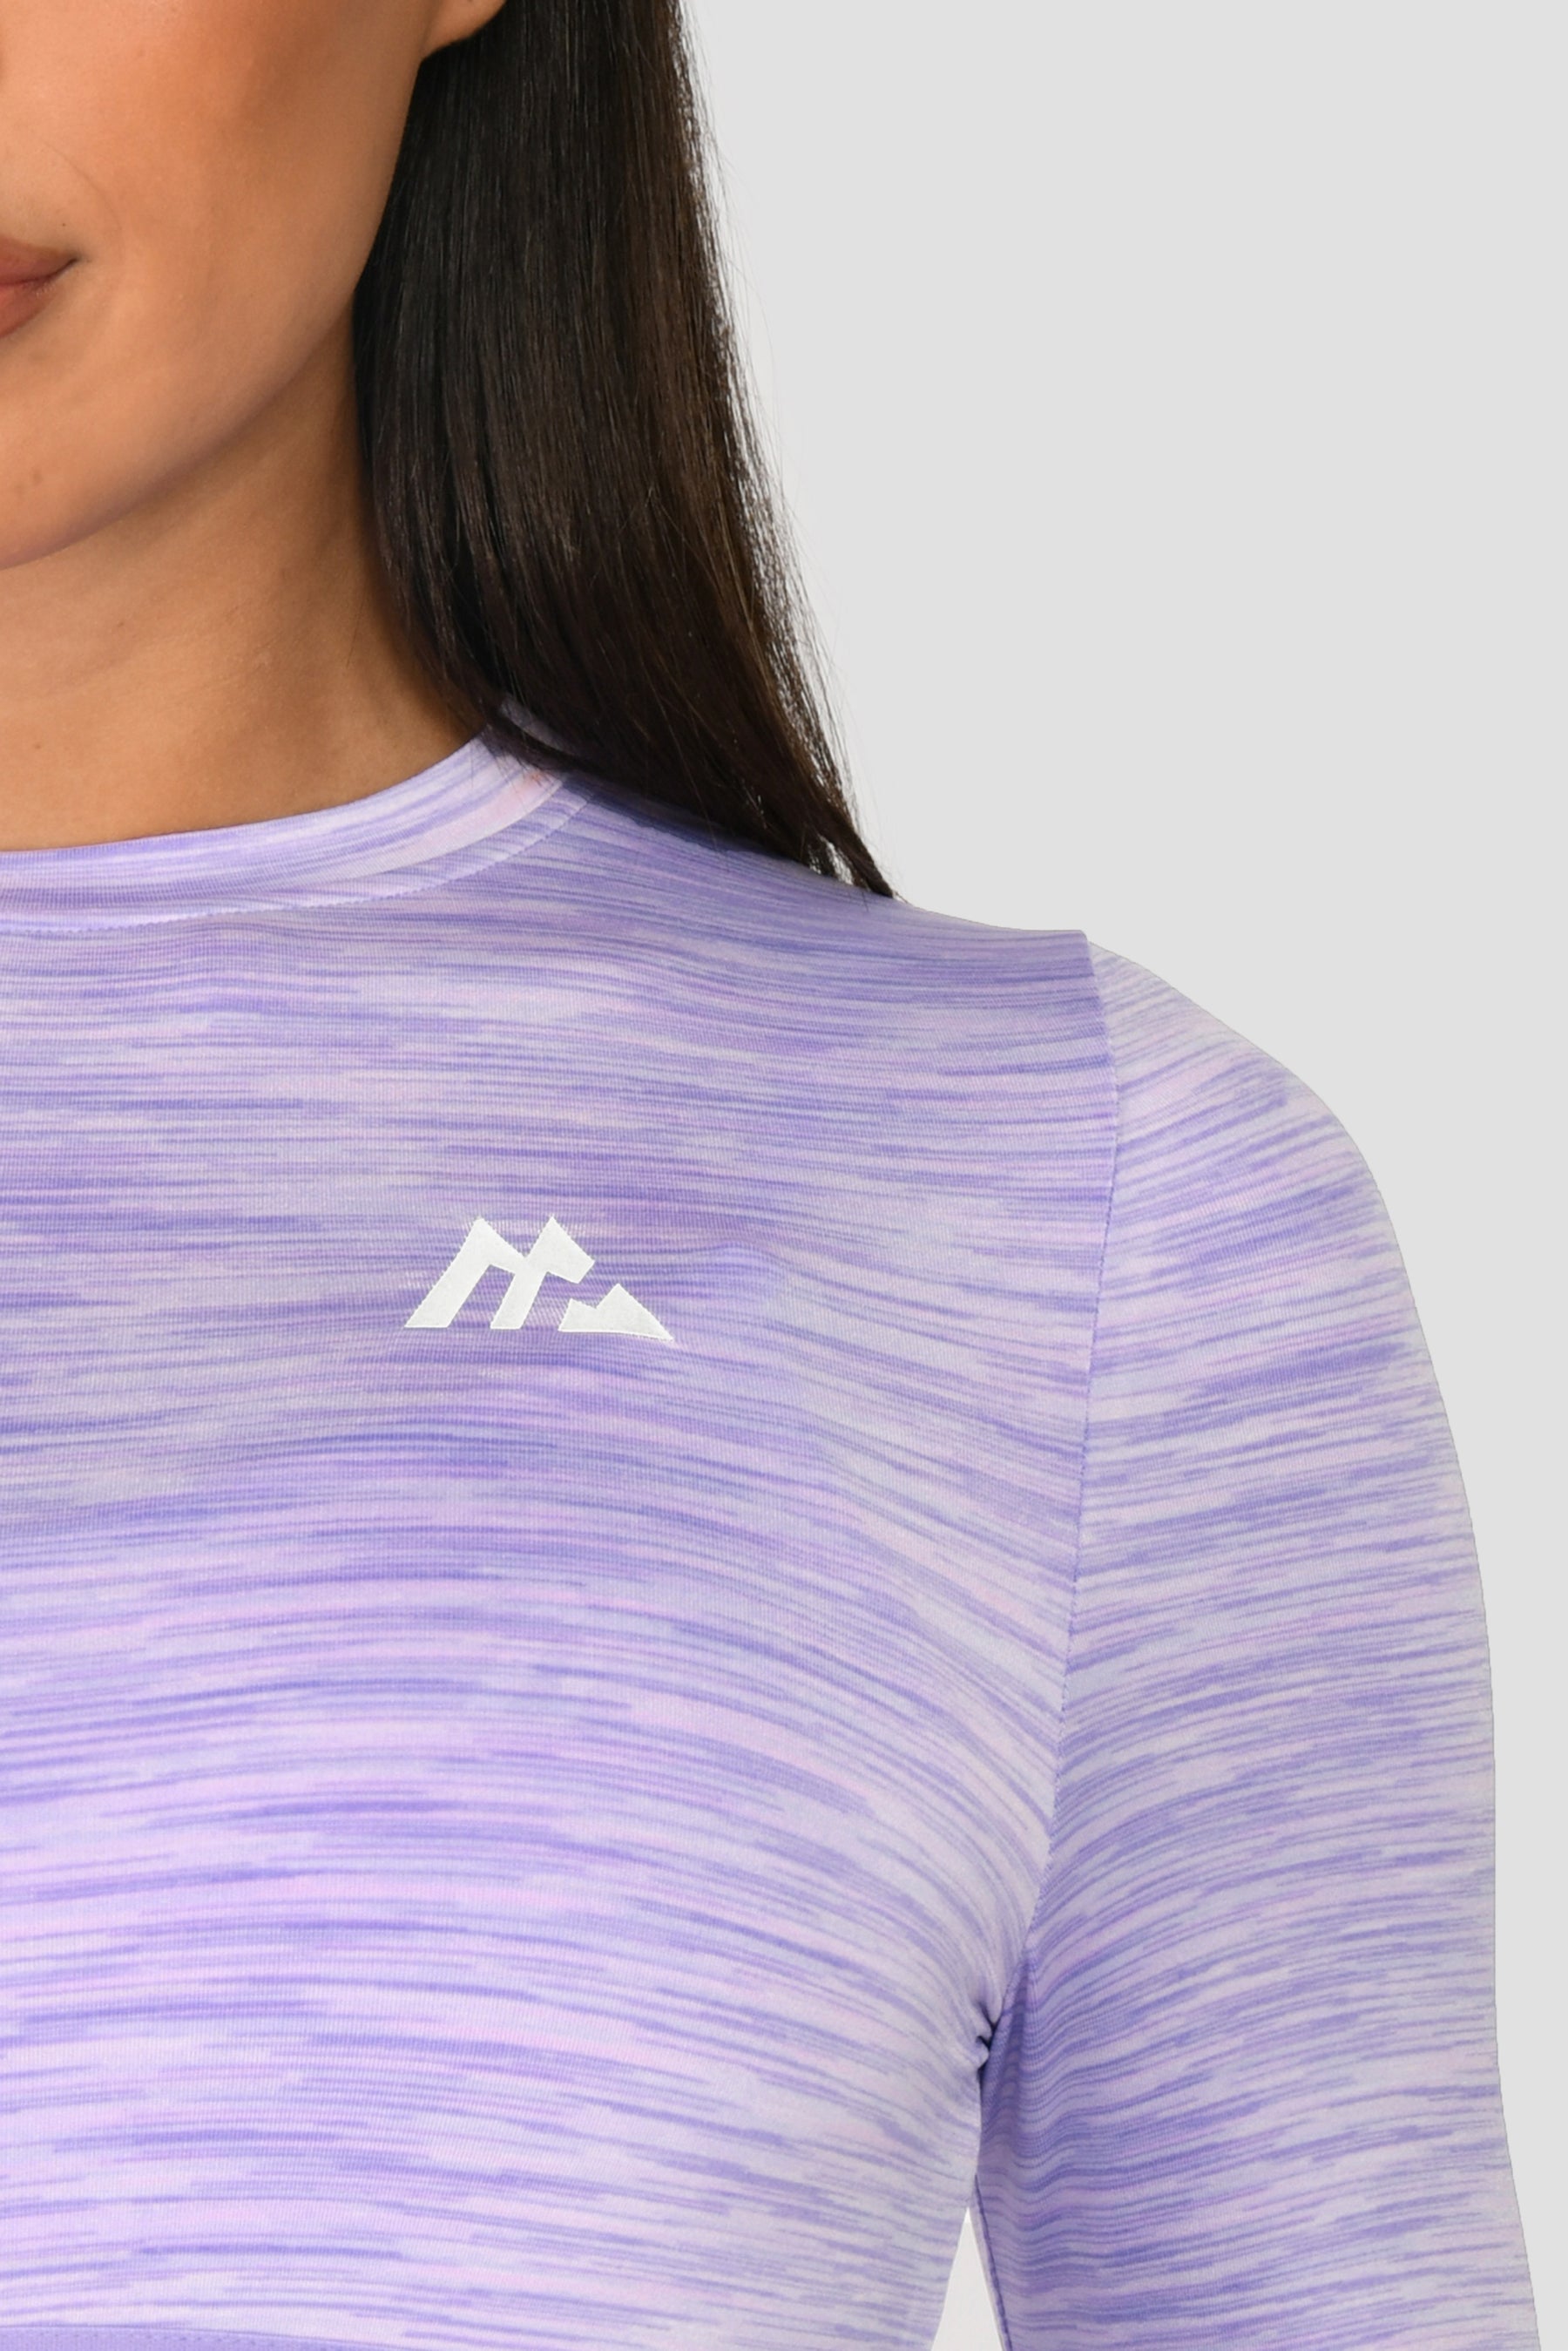 Women's Trail Icon Long Sleeve Crop Top - Lilac Multi